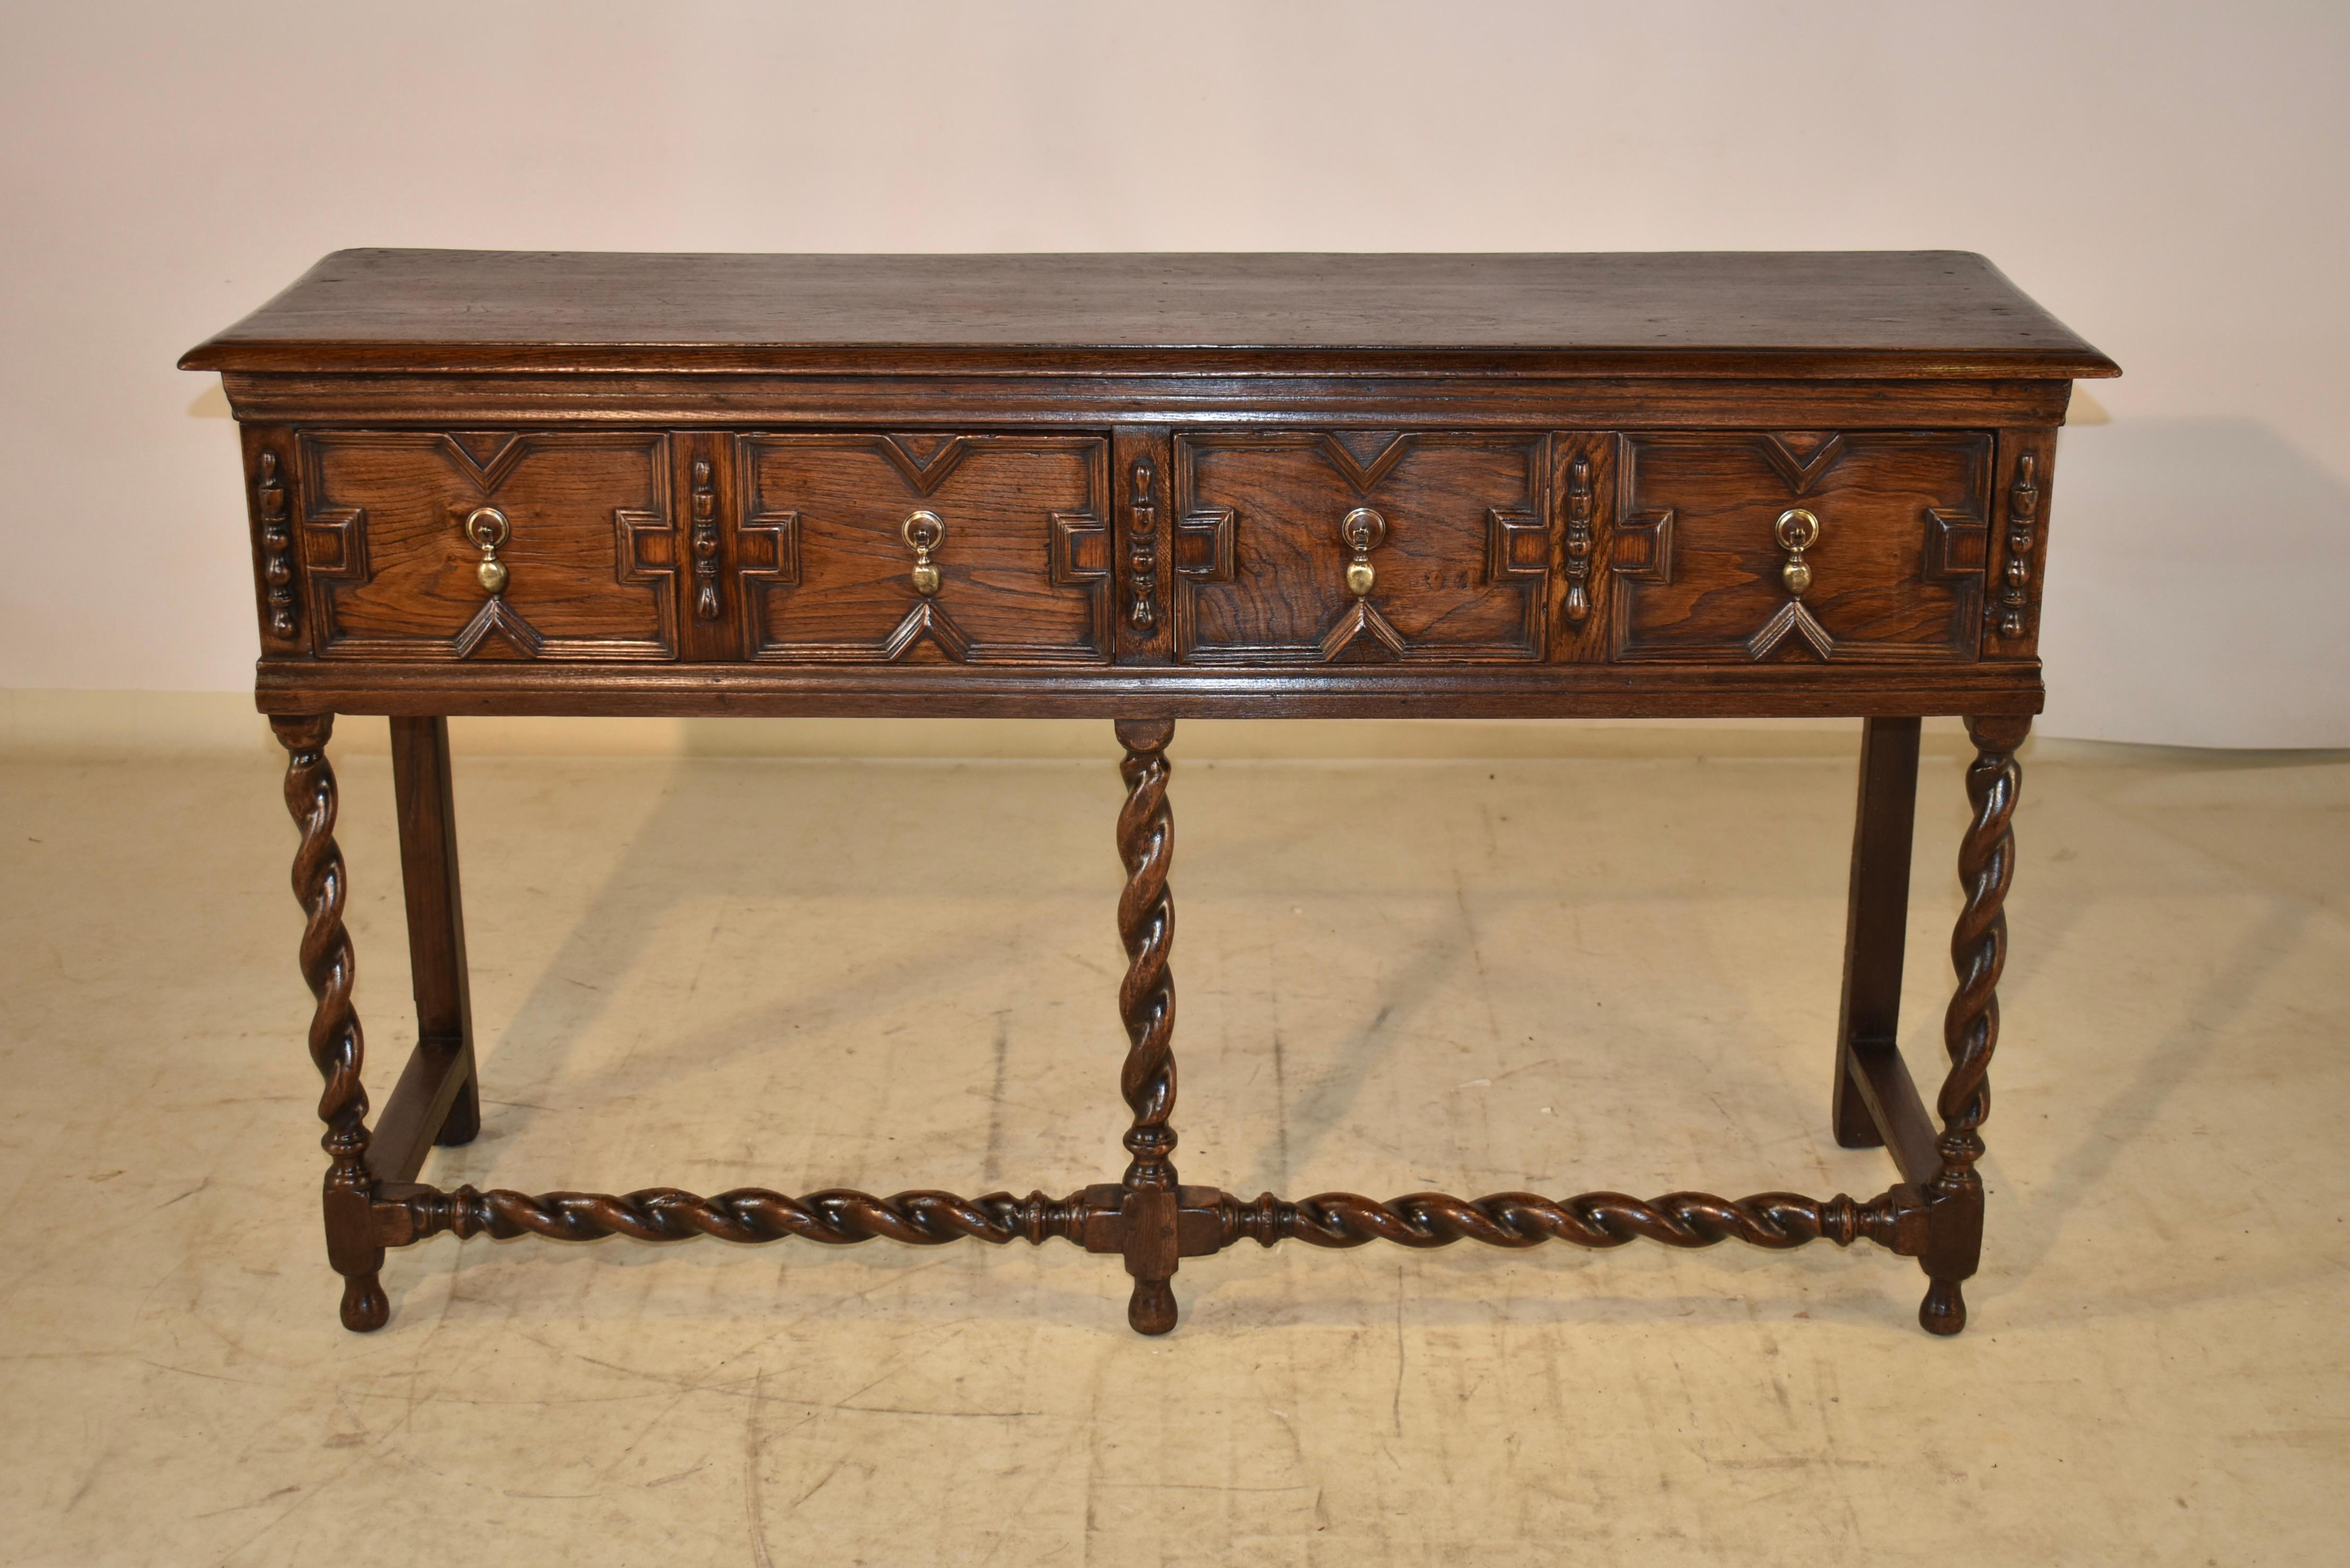 18th century oak sideboard from England with a beveled edge around the top, following down to paneled sides. There are two drawers in the front, both with raised panels and geometric moldings, flanked by applied turnings for added design flare. The